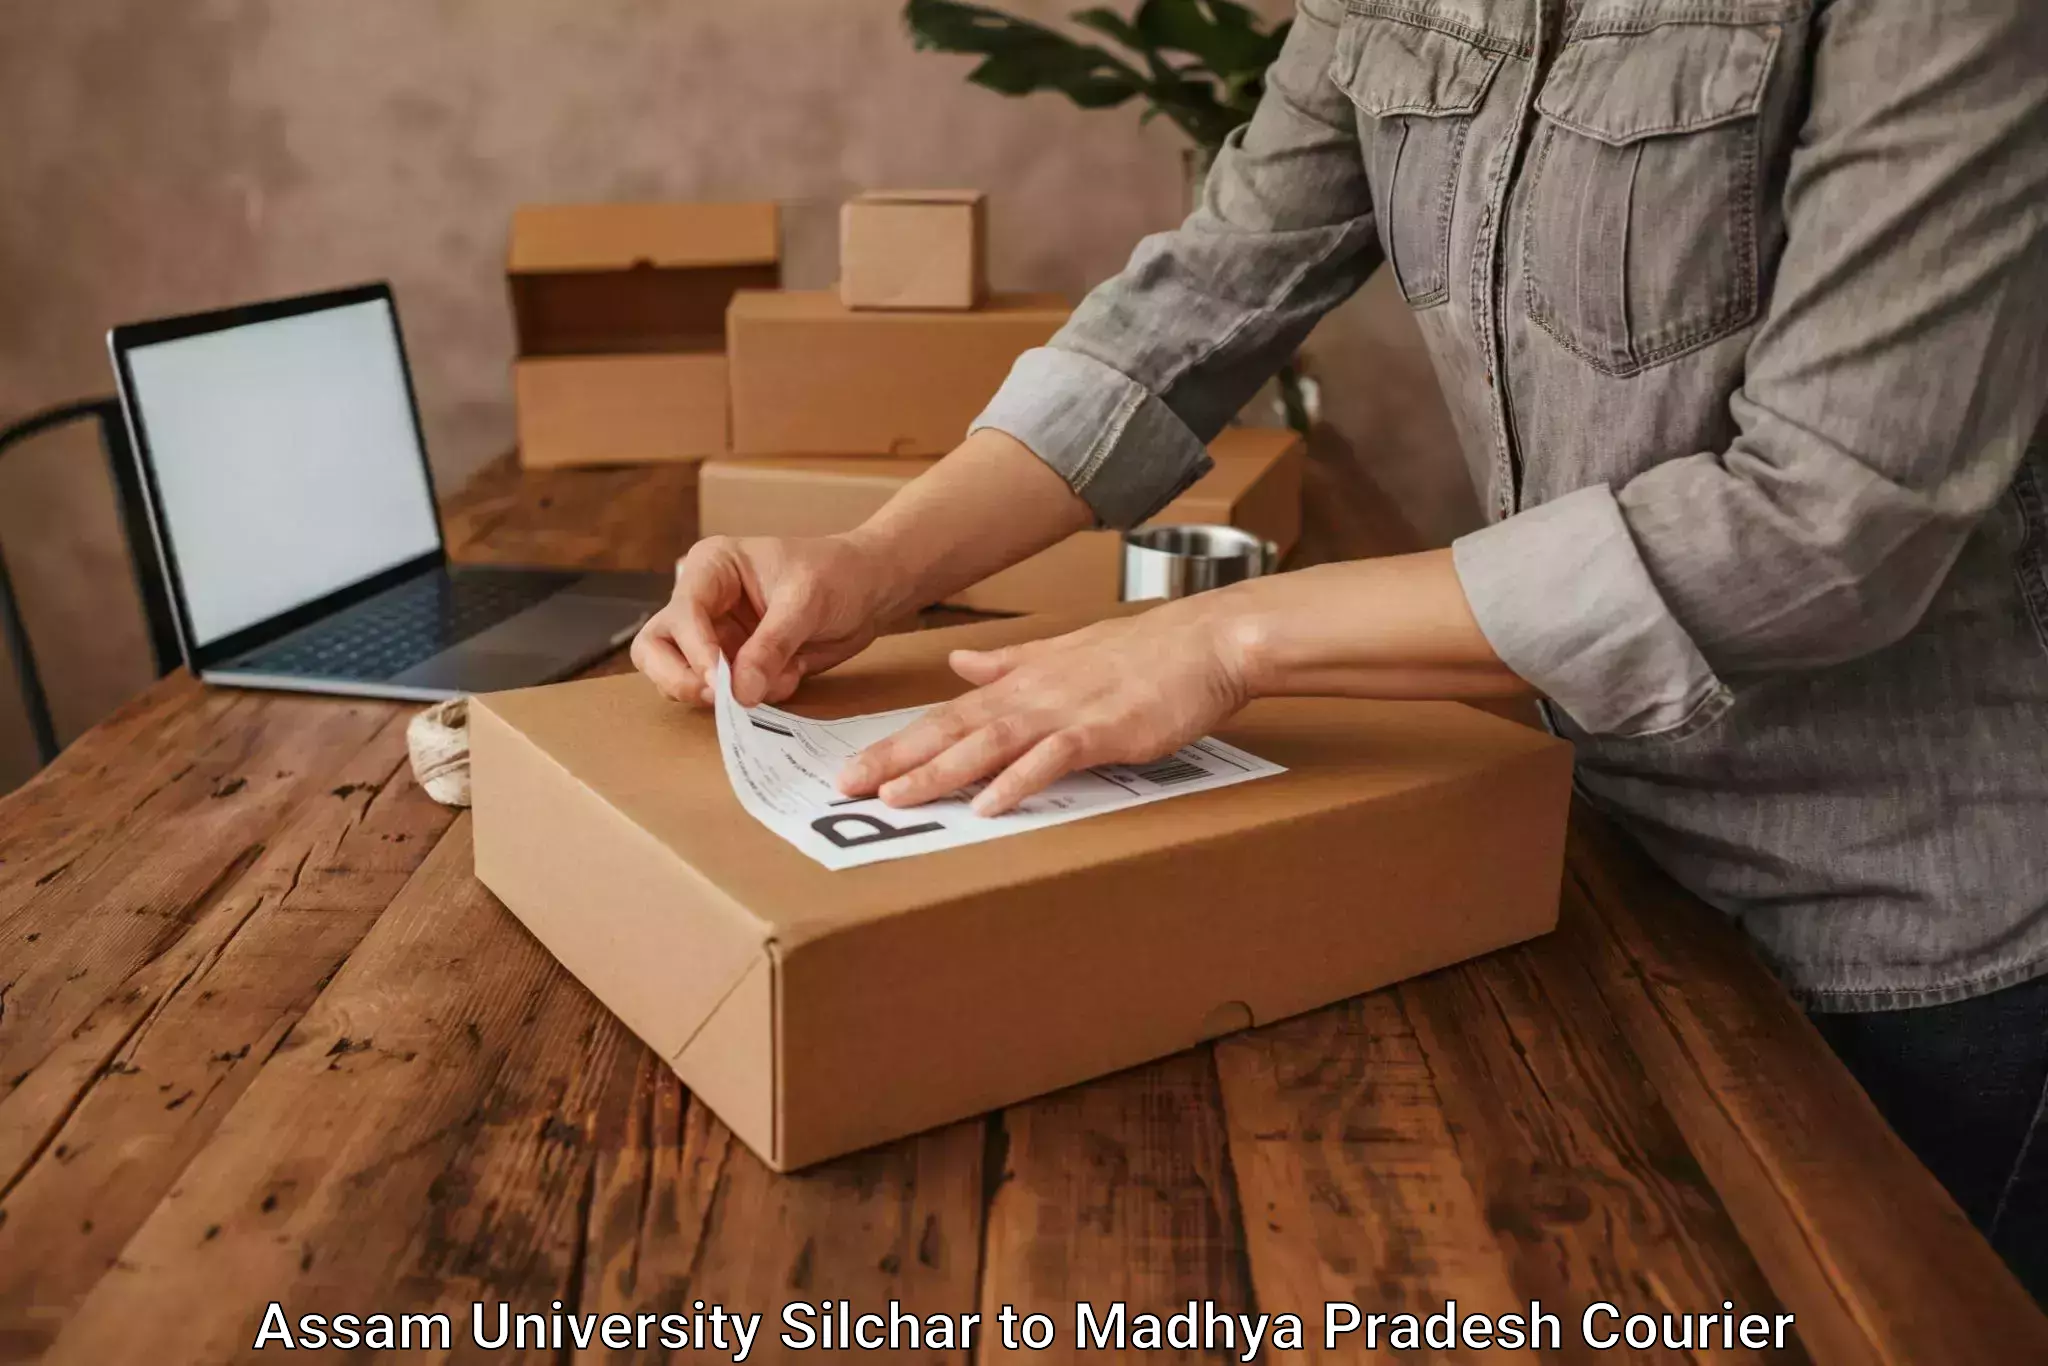 Customer-oriented courier services Assam University Silchar to Nagod